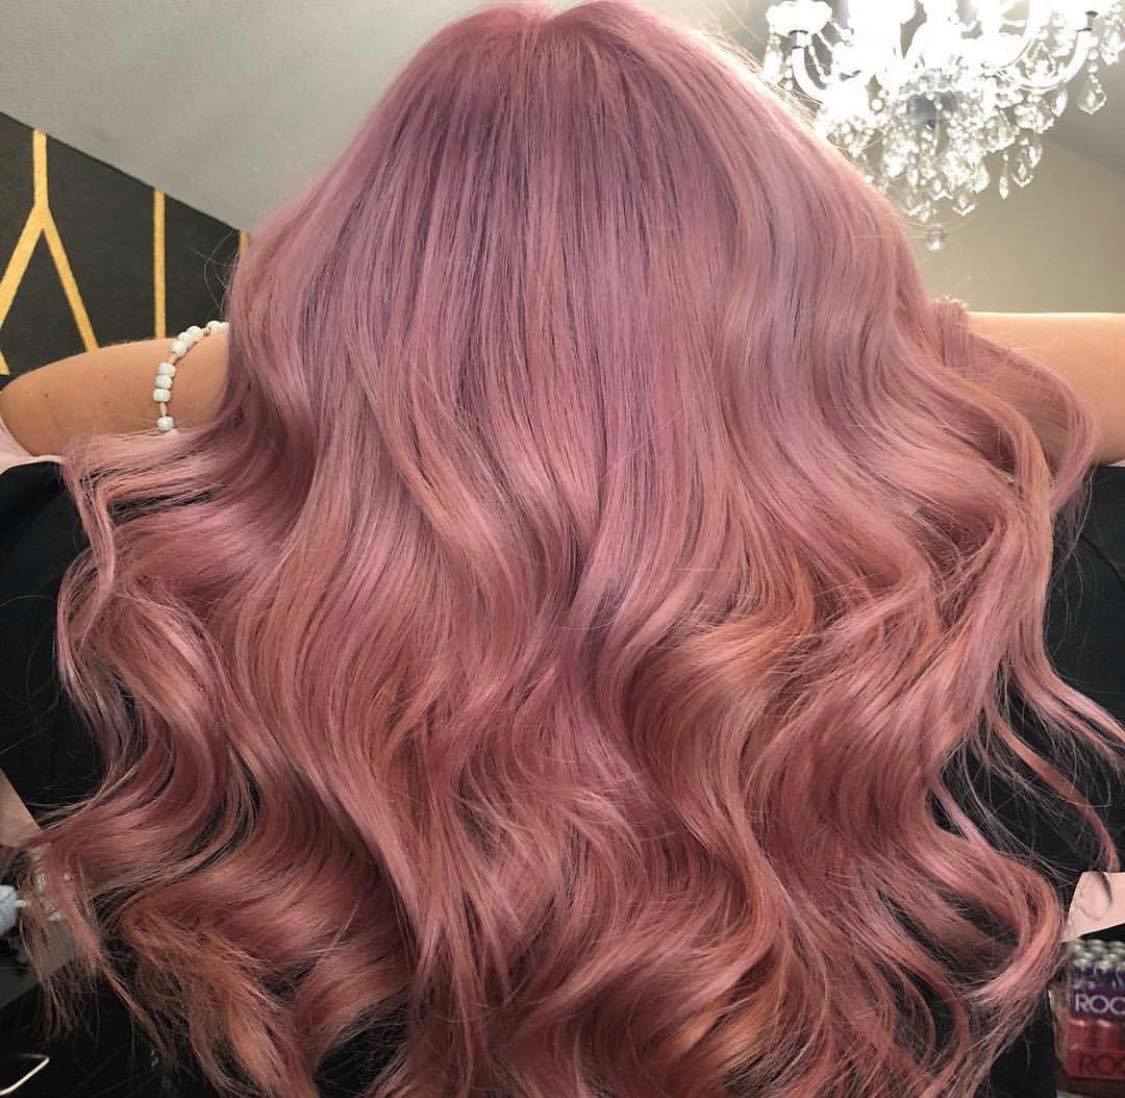 Most Popular Hair Colors For 2019 Beautiful Trends Today